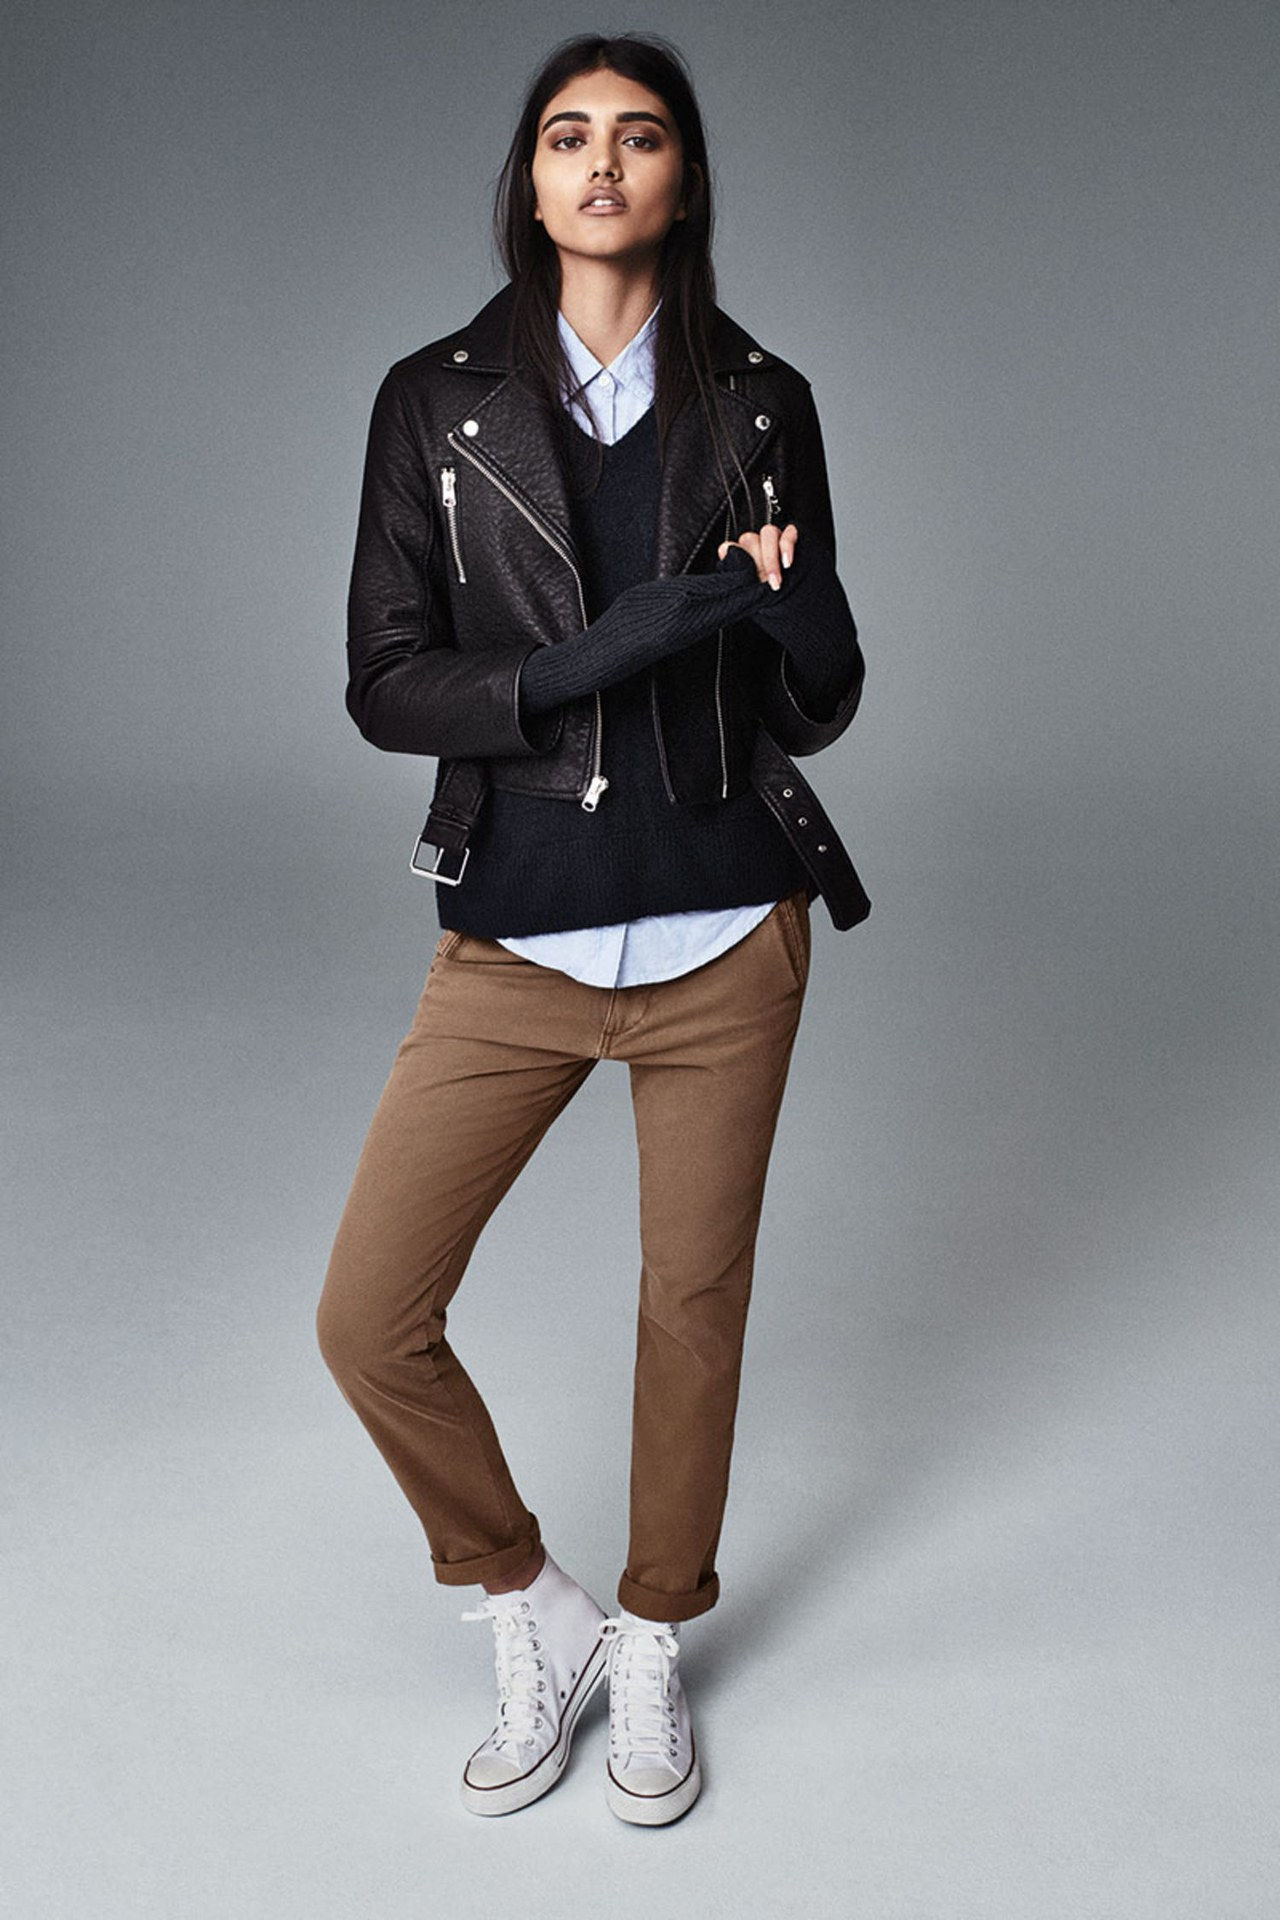 nuevo abercrombie fitch campaign picture neelam gill leather jacket